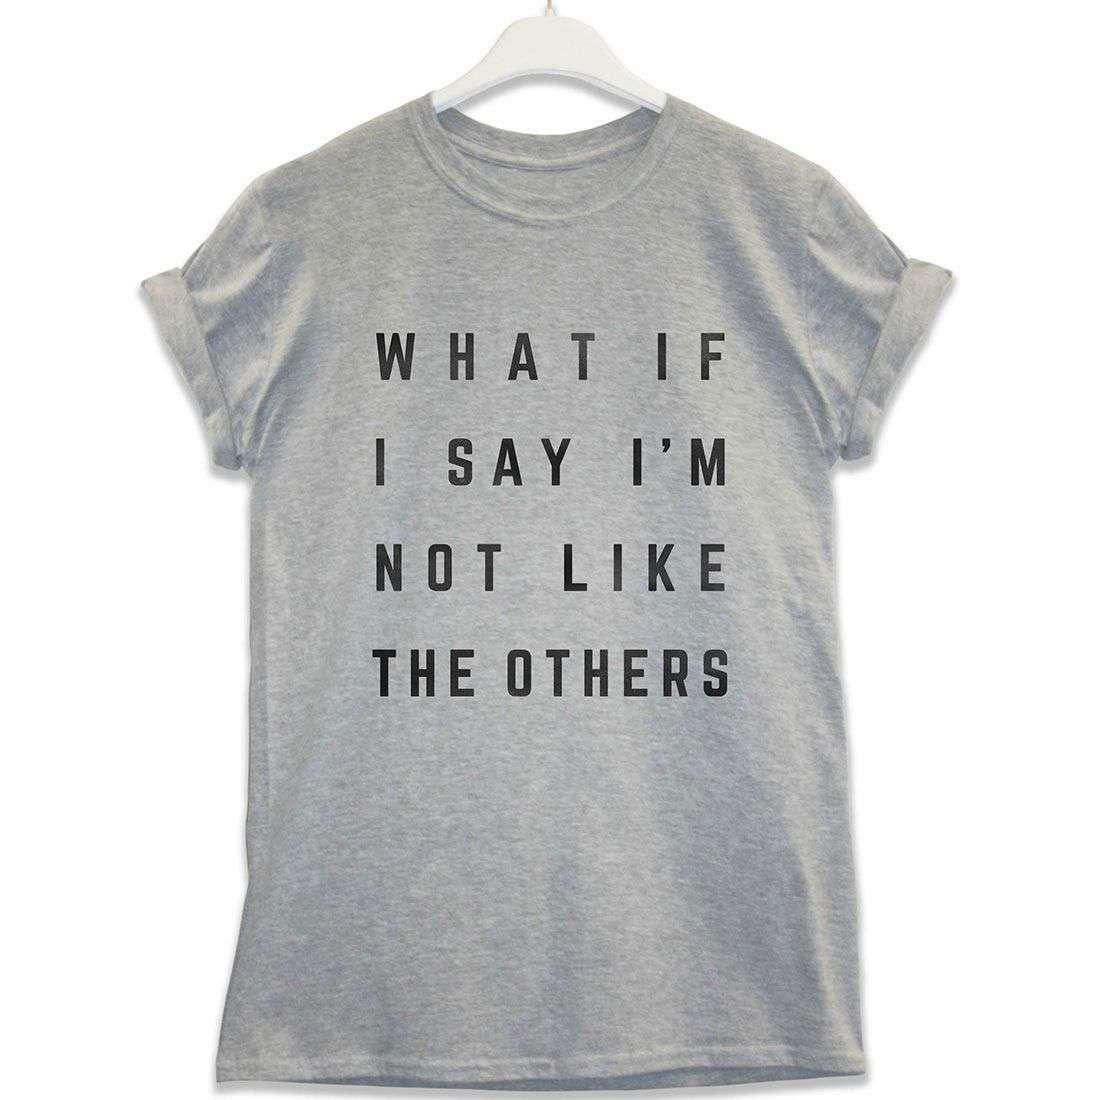 Not Like The Others Graphic T-Shirt For Men 8Ball